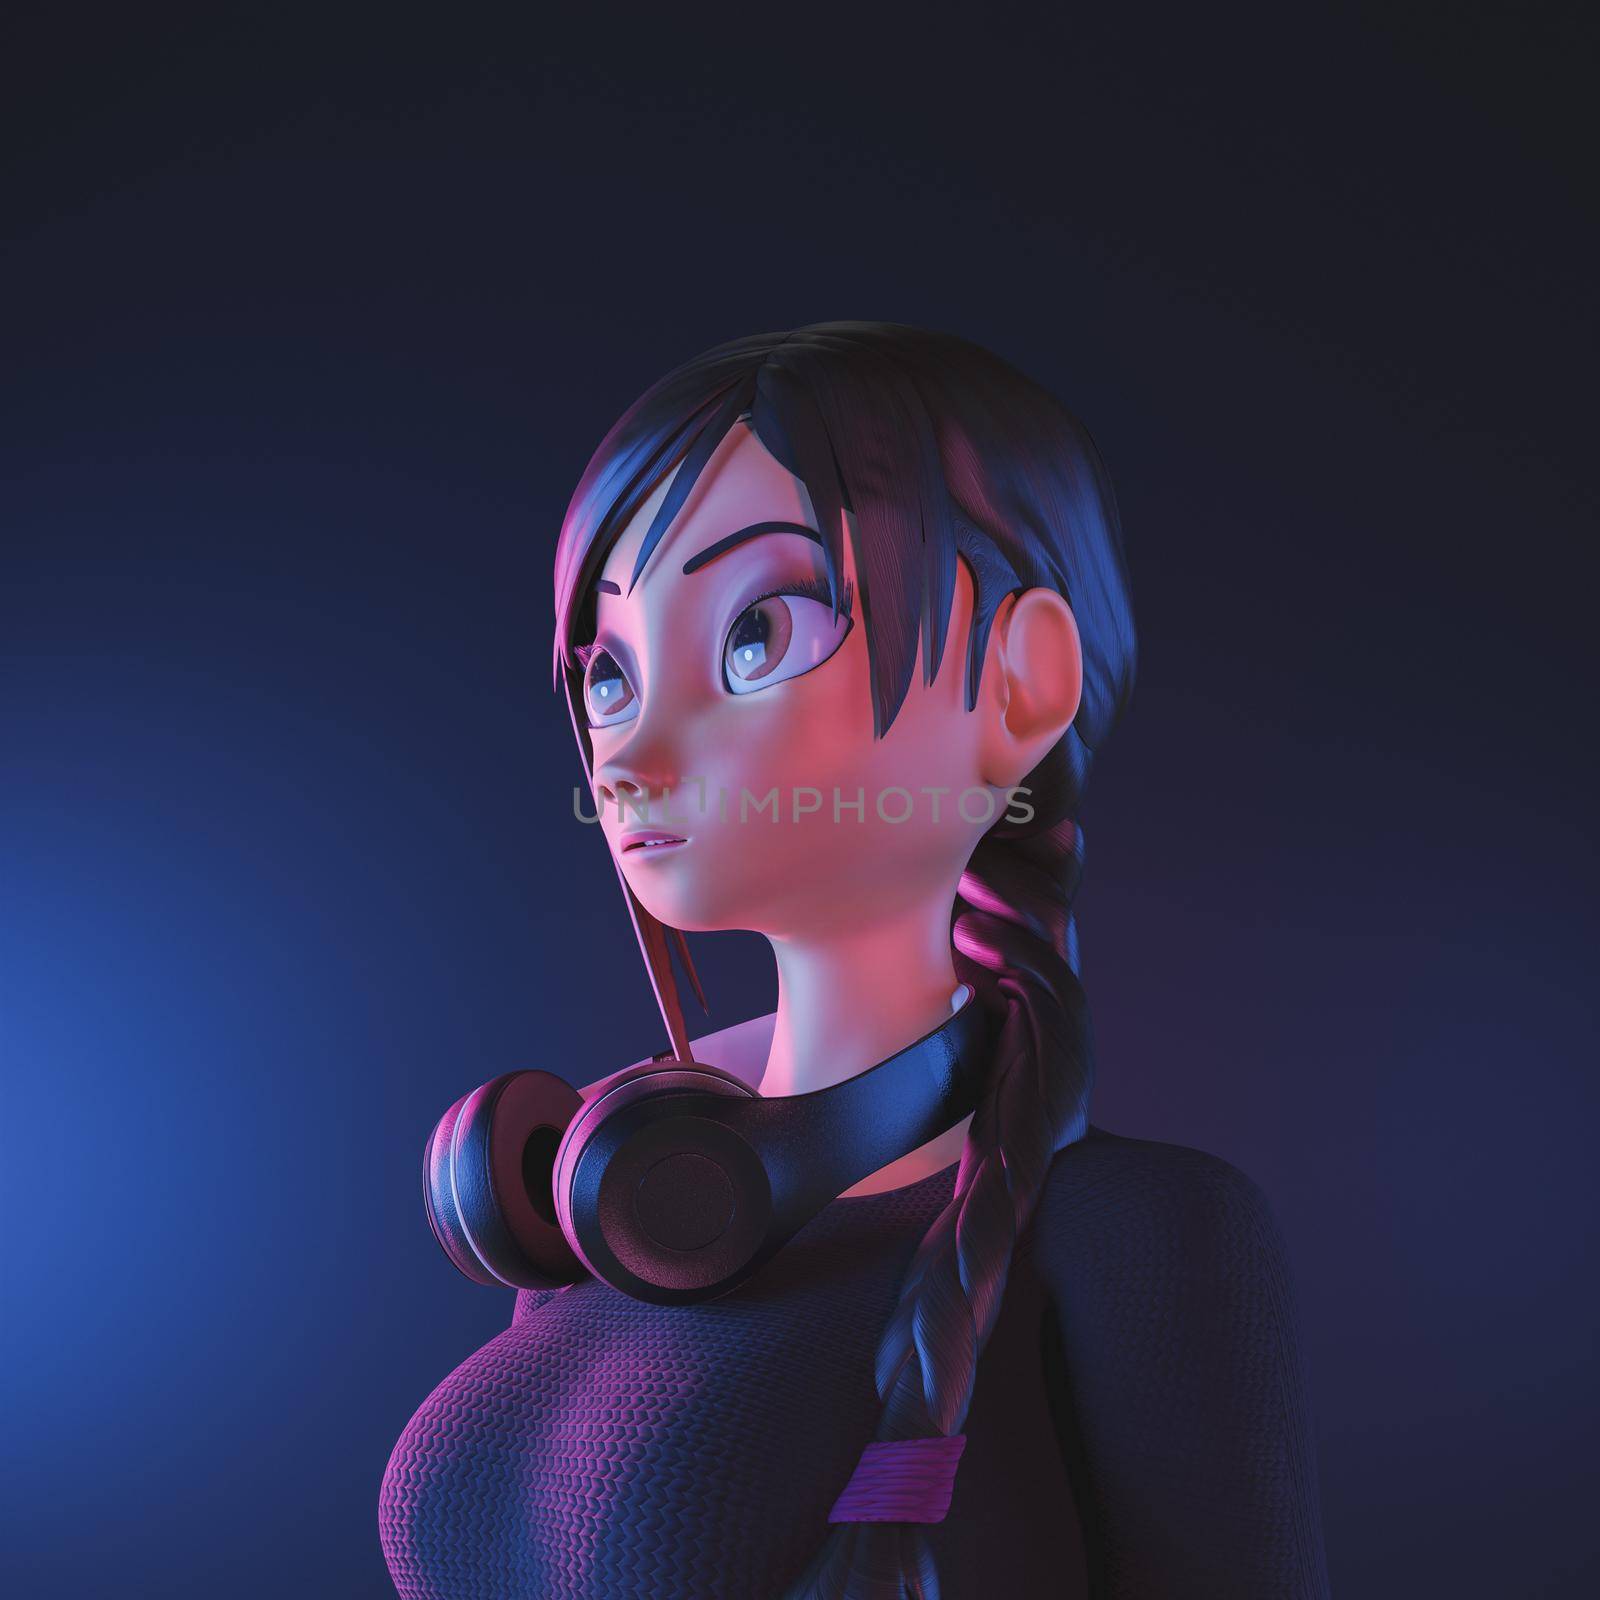 girl with headphones and neon lighting. stylized 3d character by asolano